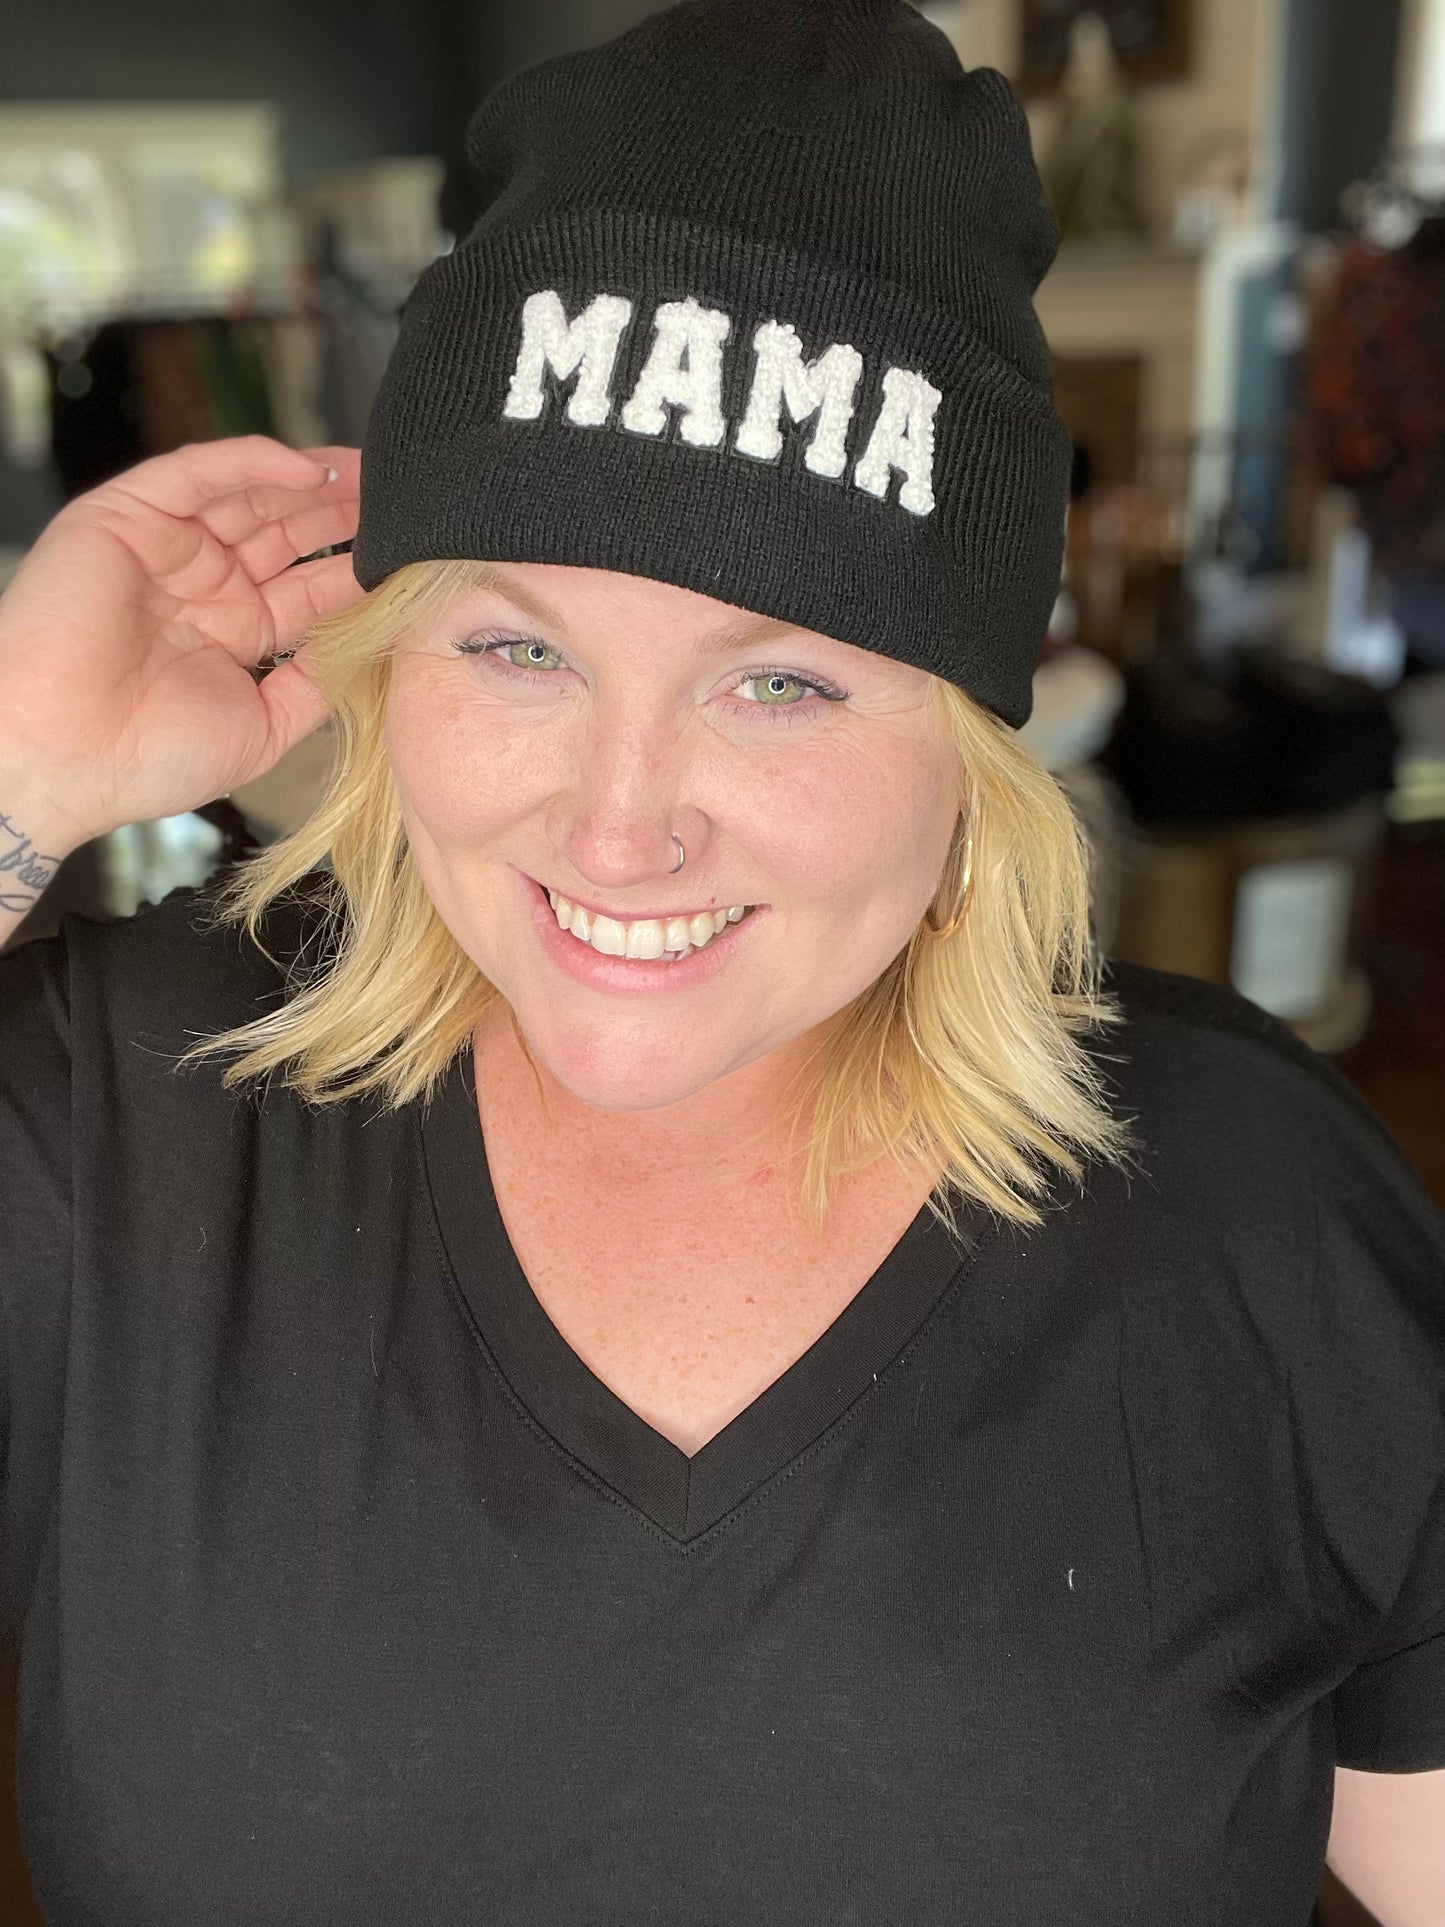 Mama Embroidered Beanie (Multiple Colors)